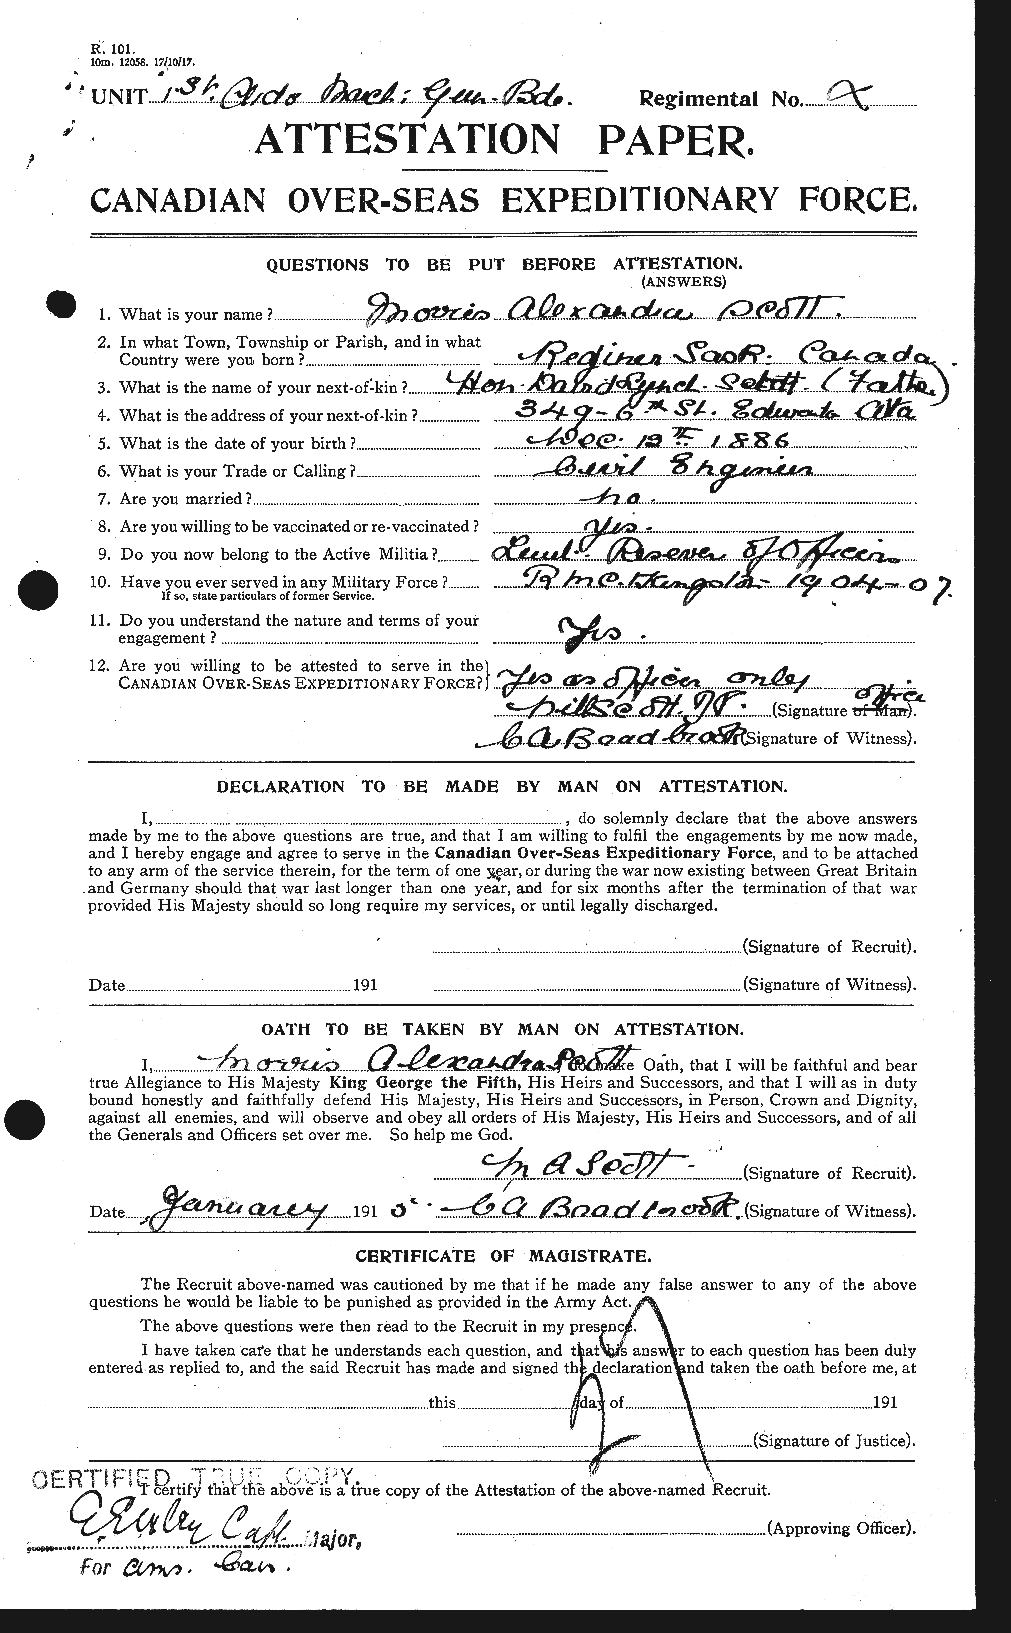 Personnel Records of the First World War - CEF 083486a